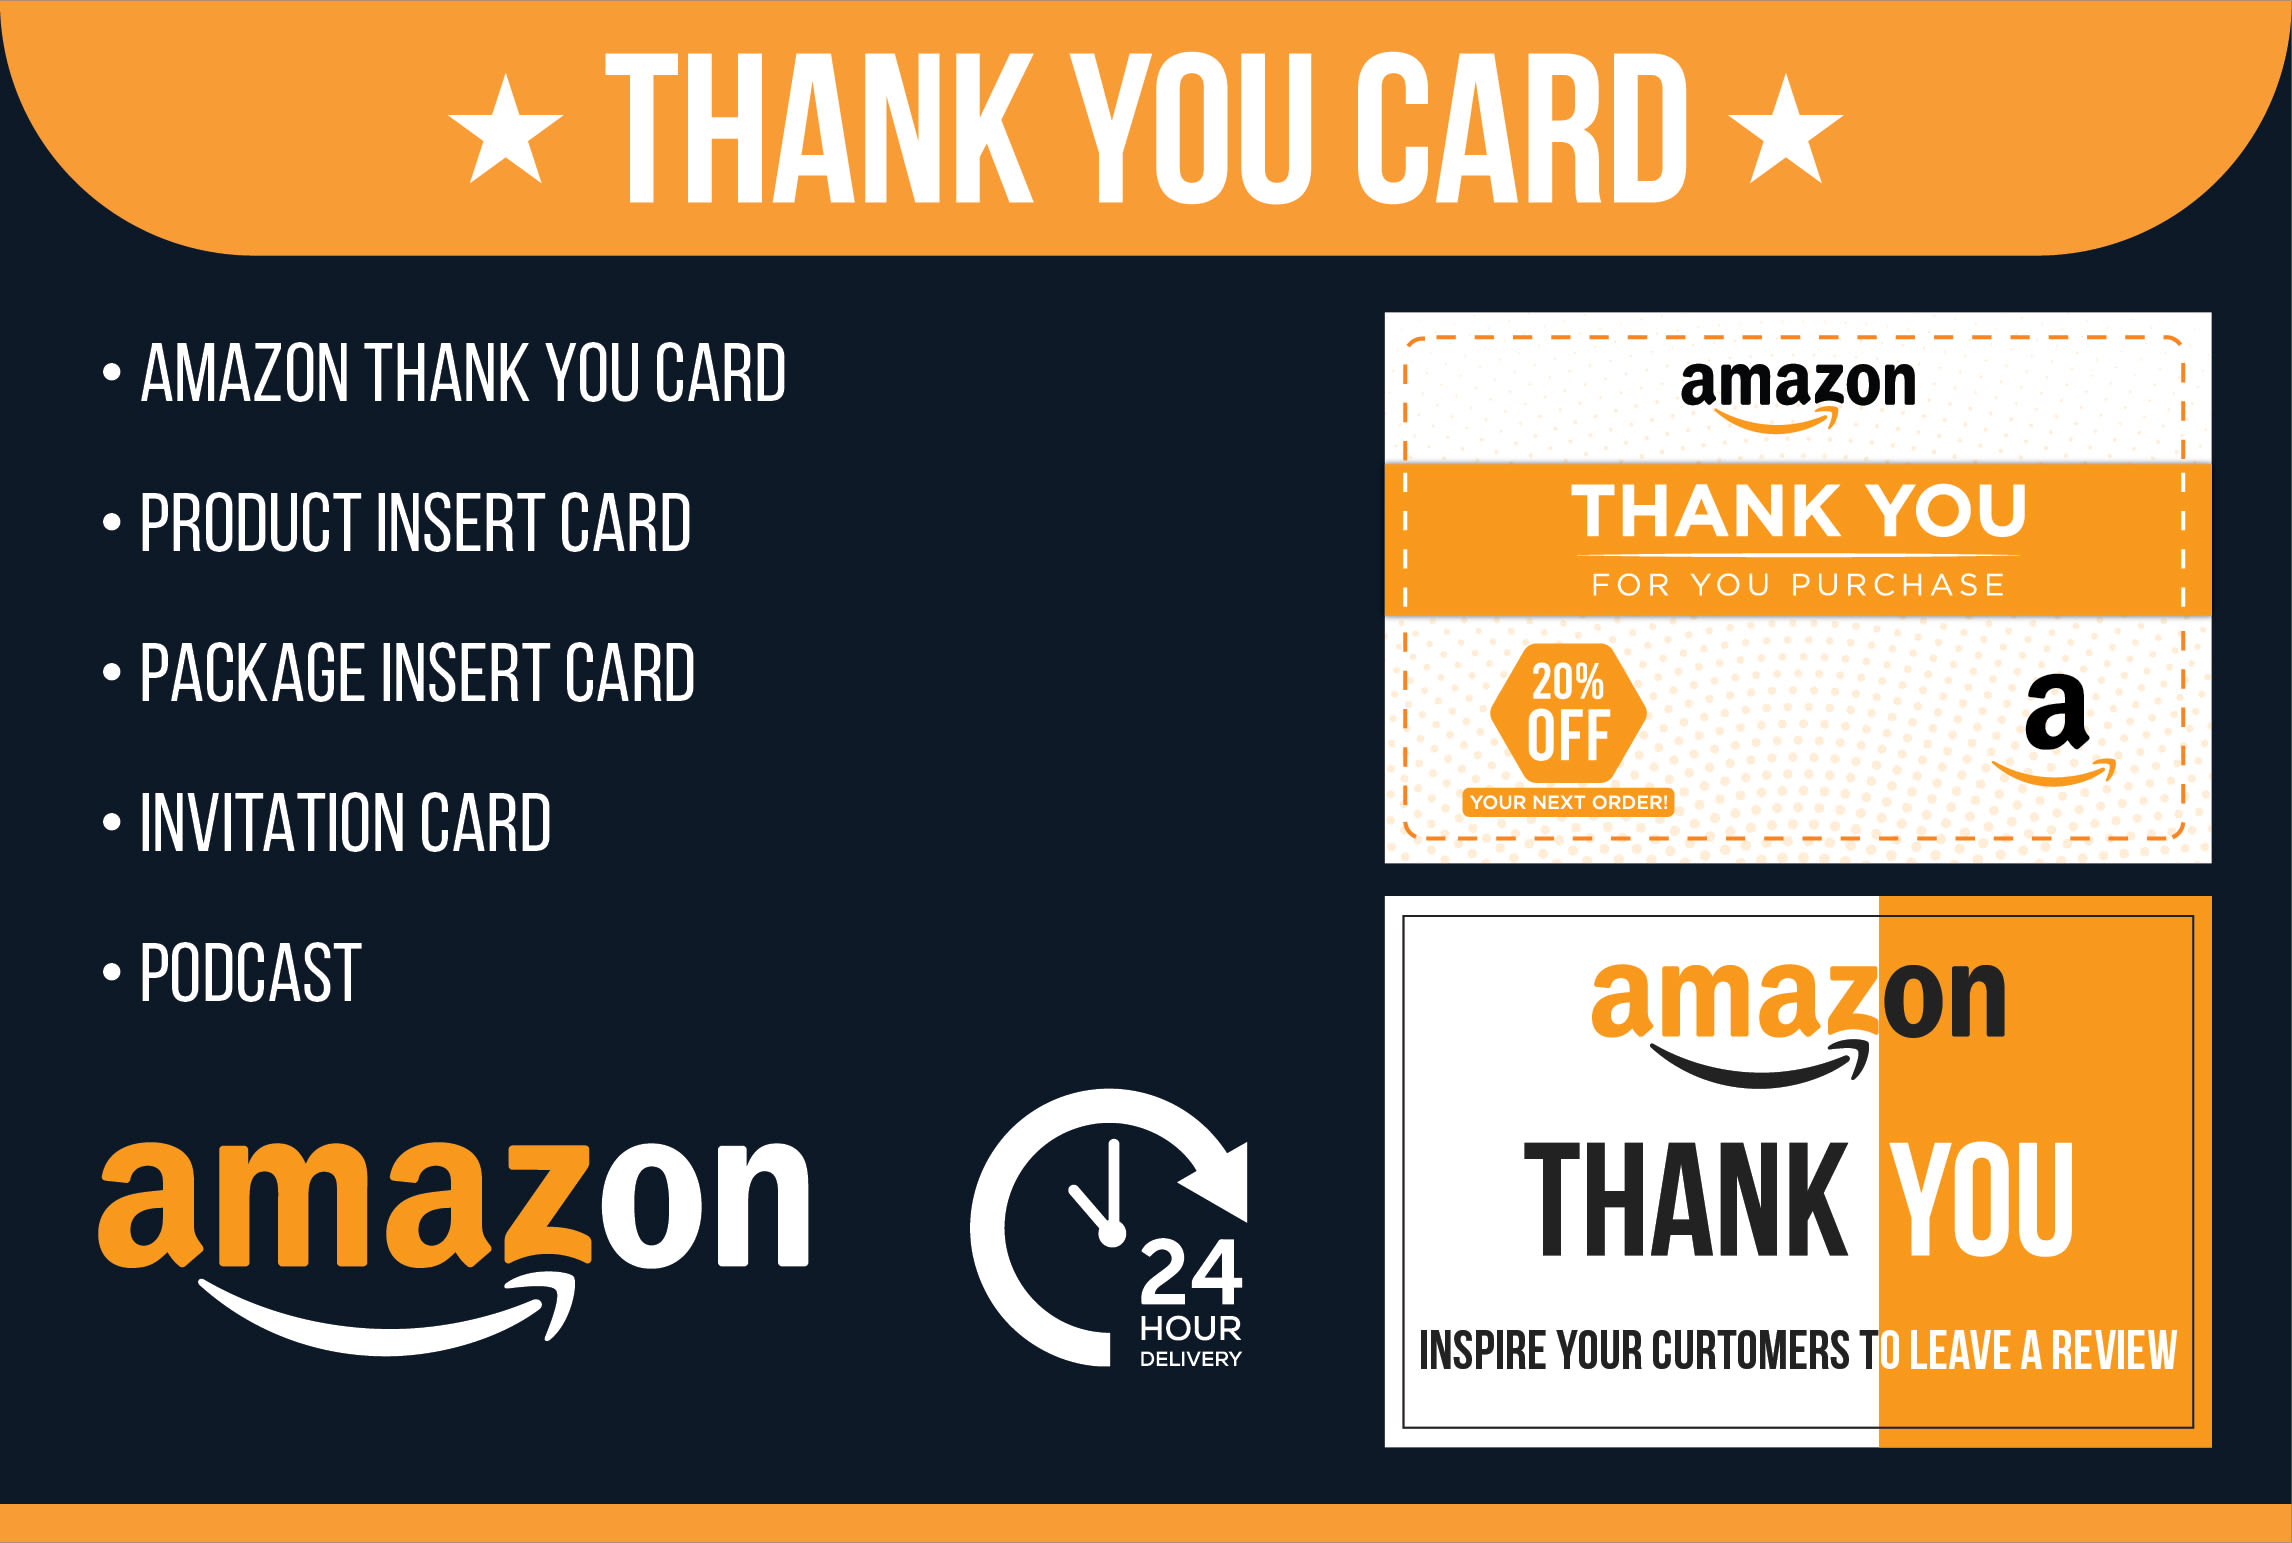 Buy $10 Amazon Gift Card Card - Free with purchase of $ or more (amazoncard10)